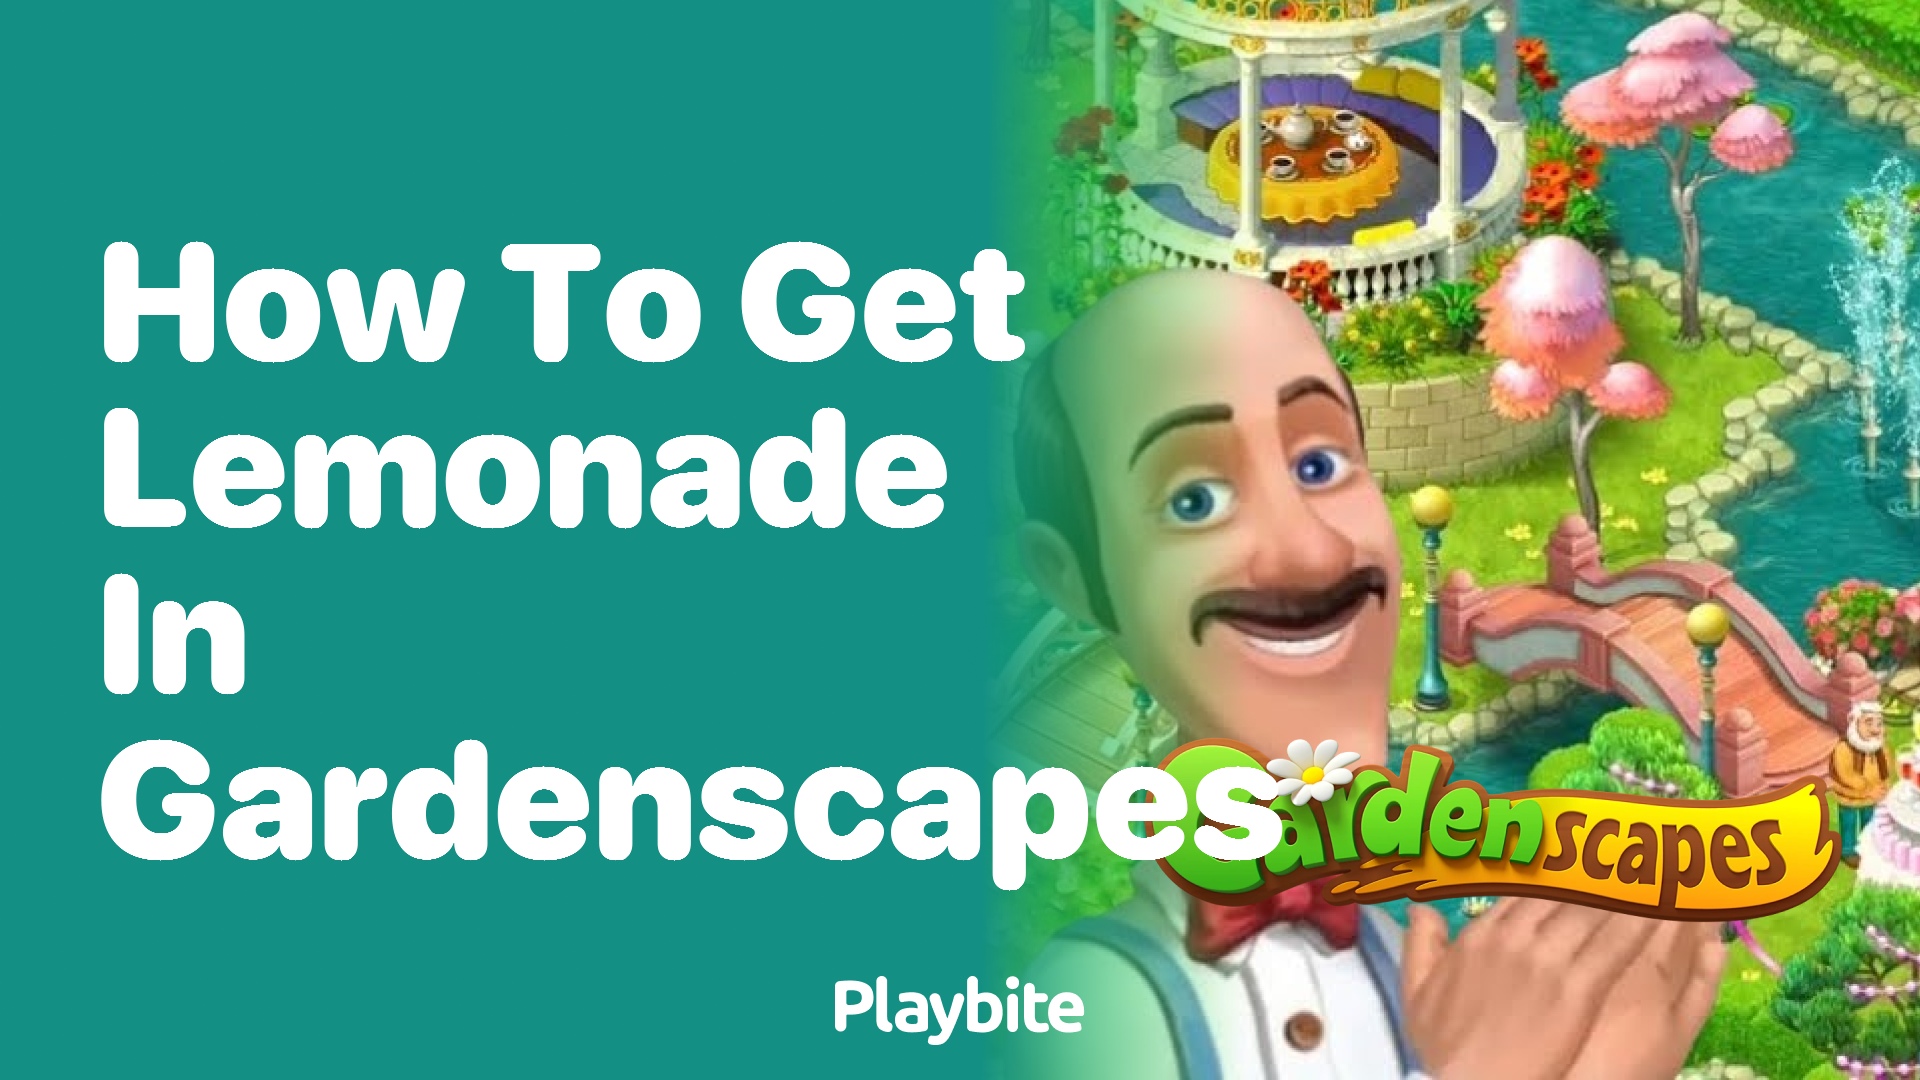 How to Get Lemonade in Gardenscapes